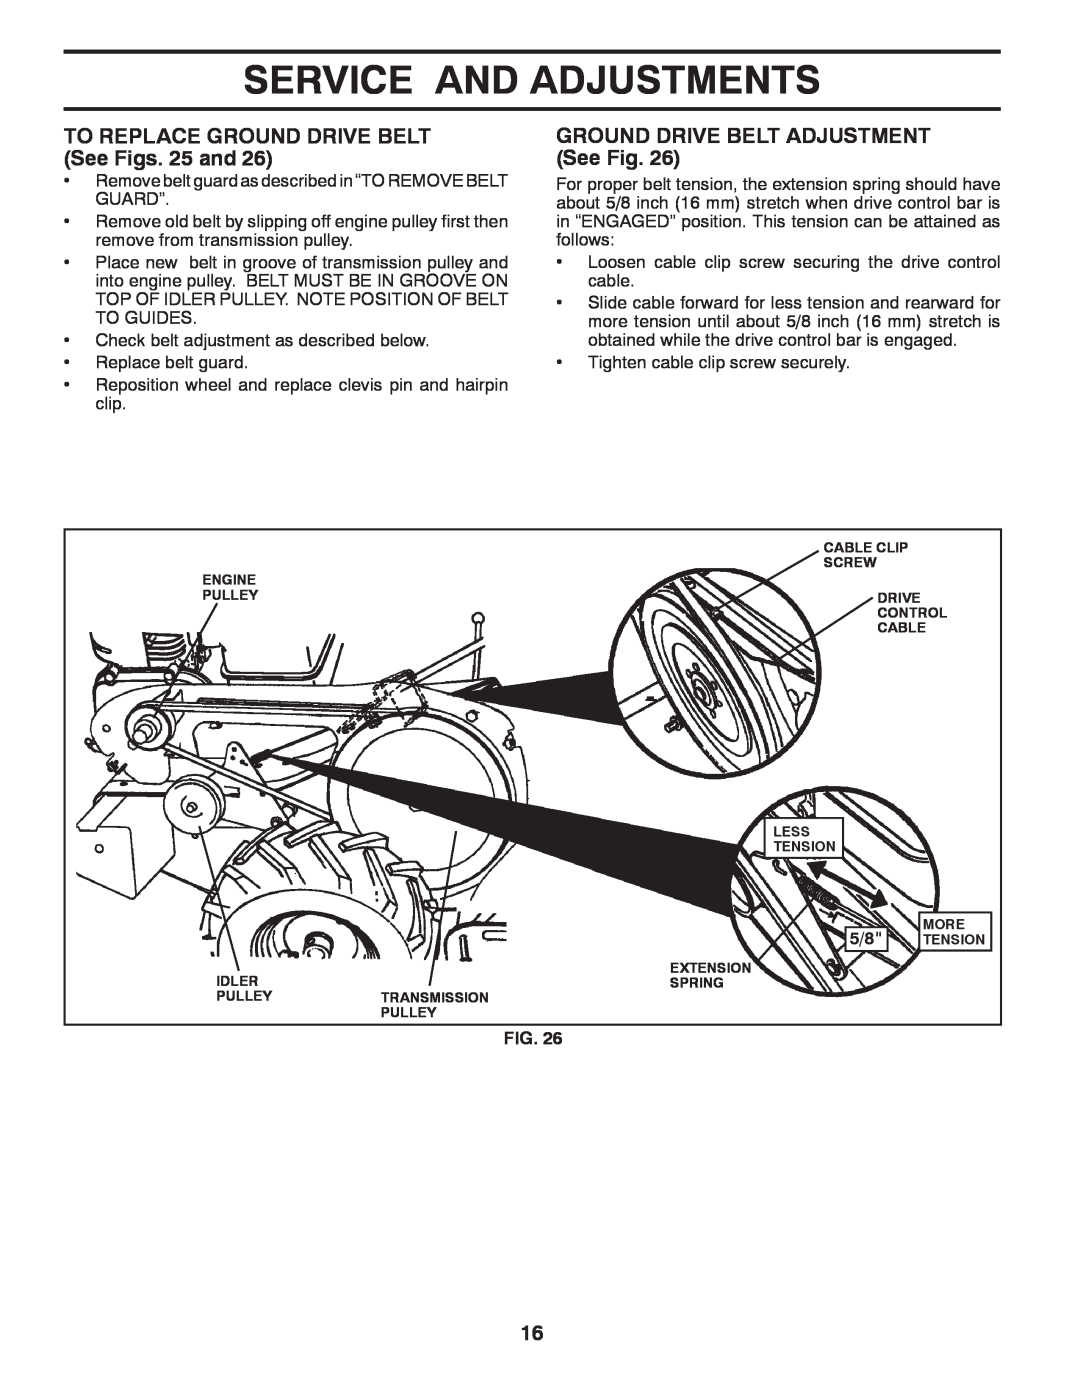 Poulan DRT875 TO REPLACE GROUND DRIVE BELT See Figs. 25 and, GROUND DRIVE BELT ADJUSTMENT See Fig, Service And Adjustments 